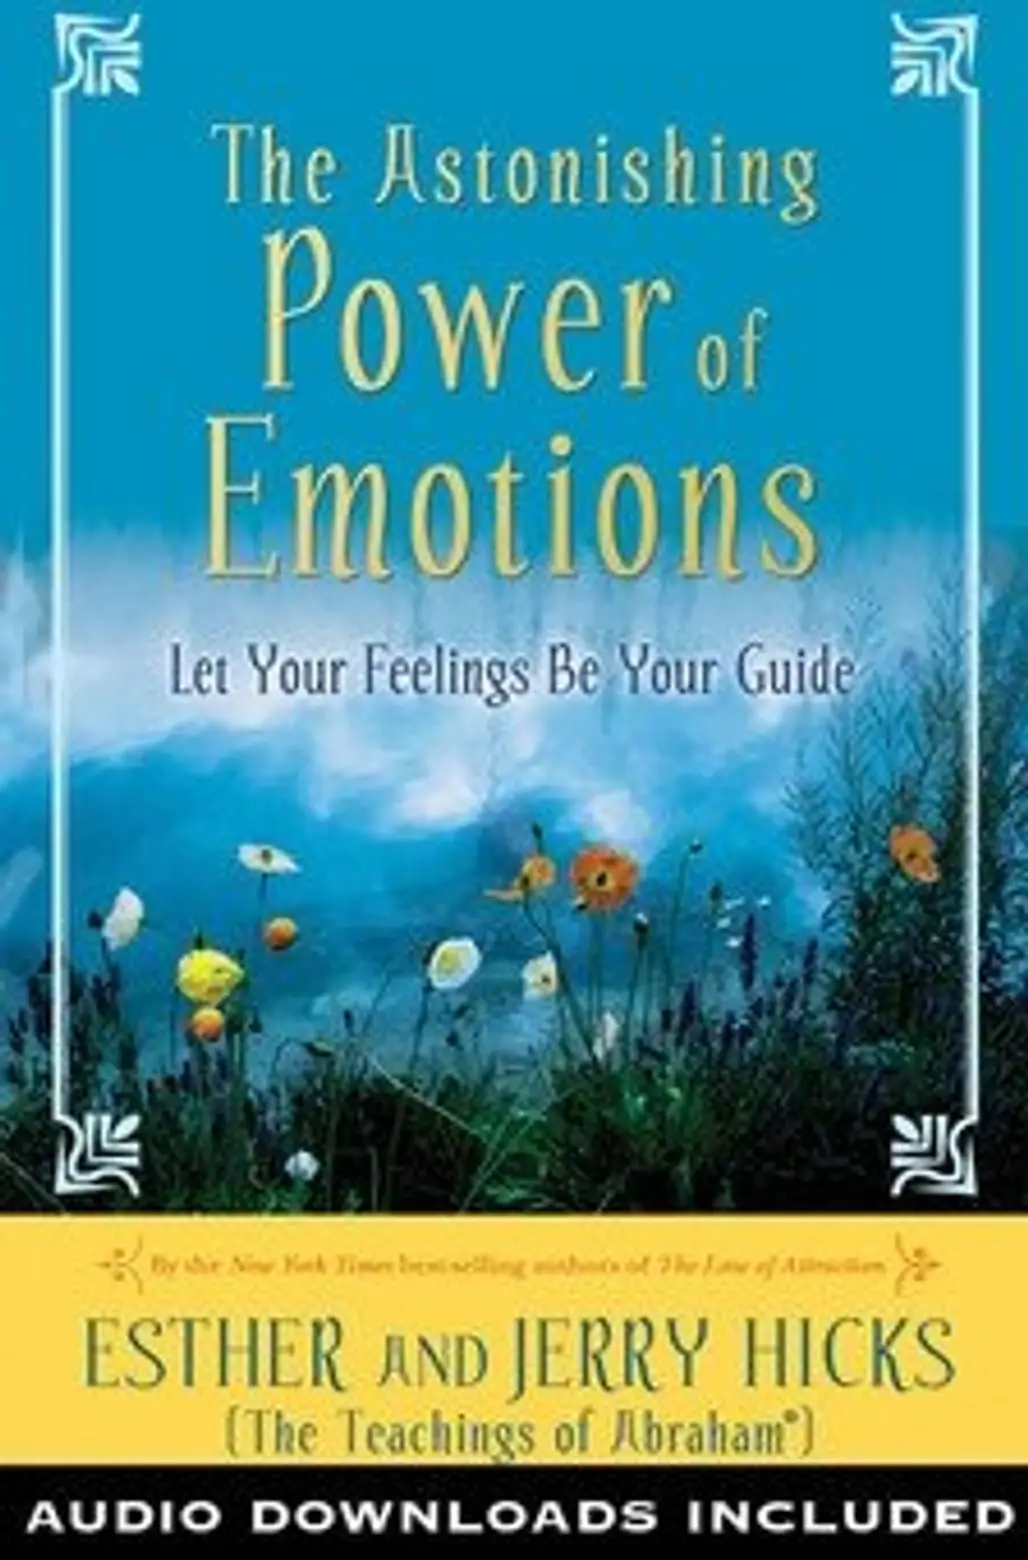 The Astonishing Power of Emotions - by Ester and Jerry Hicks